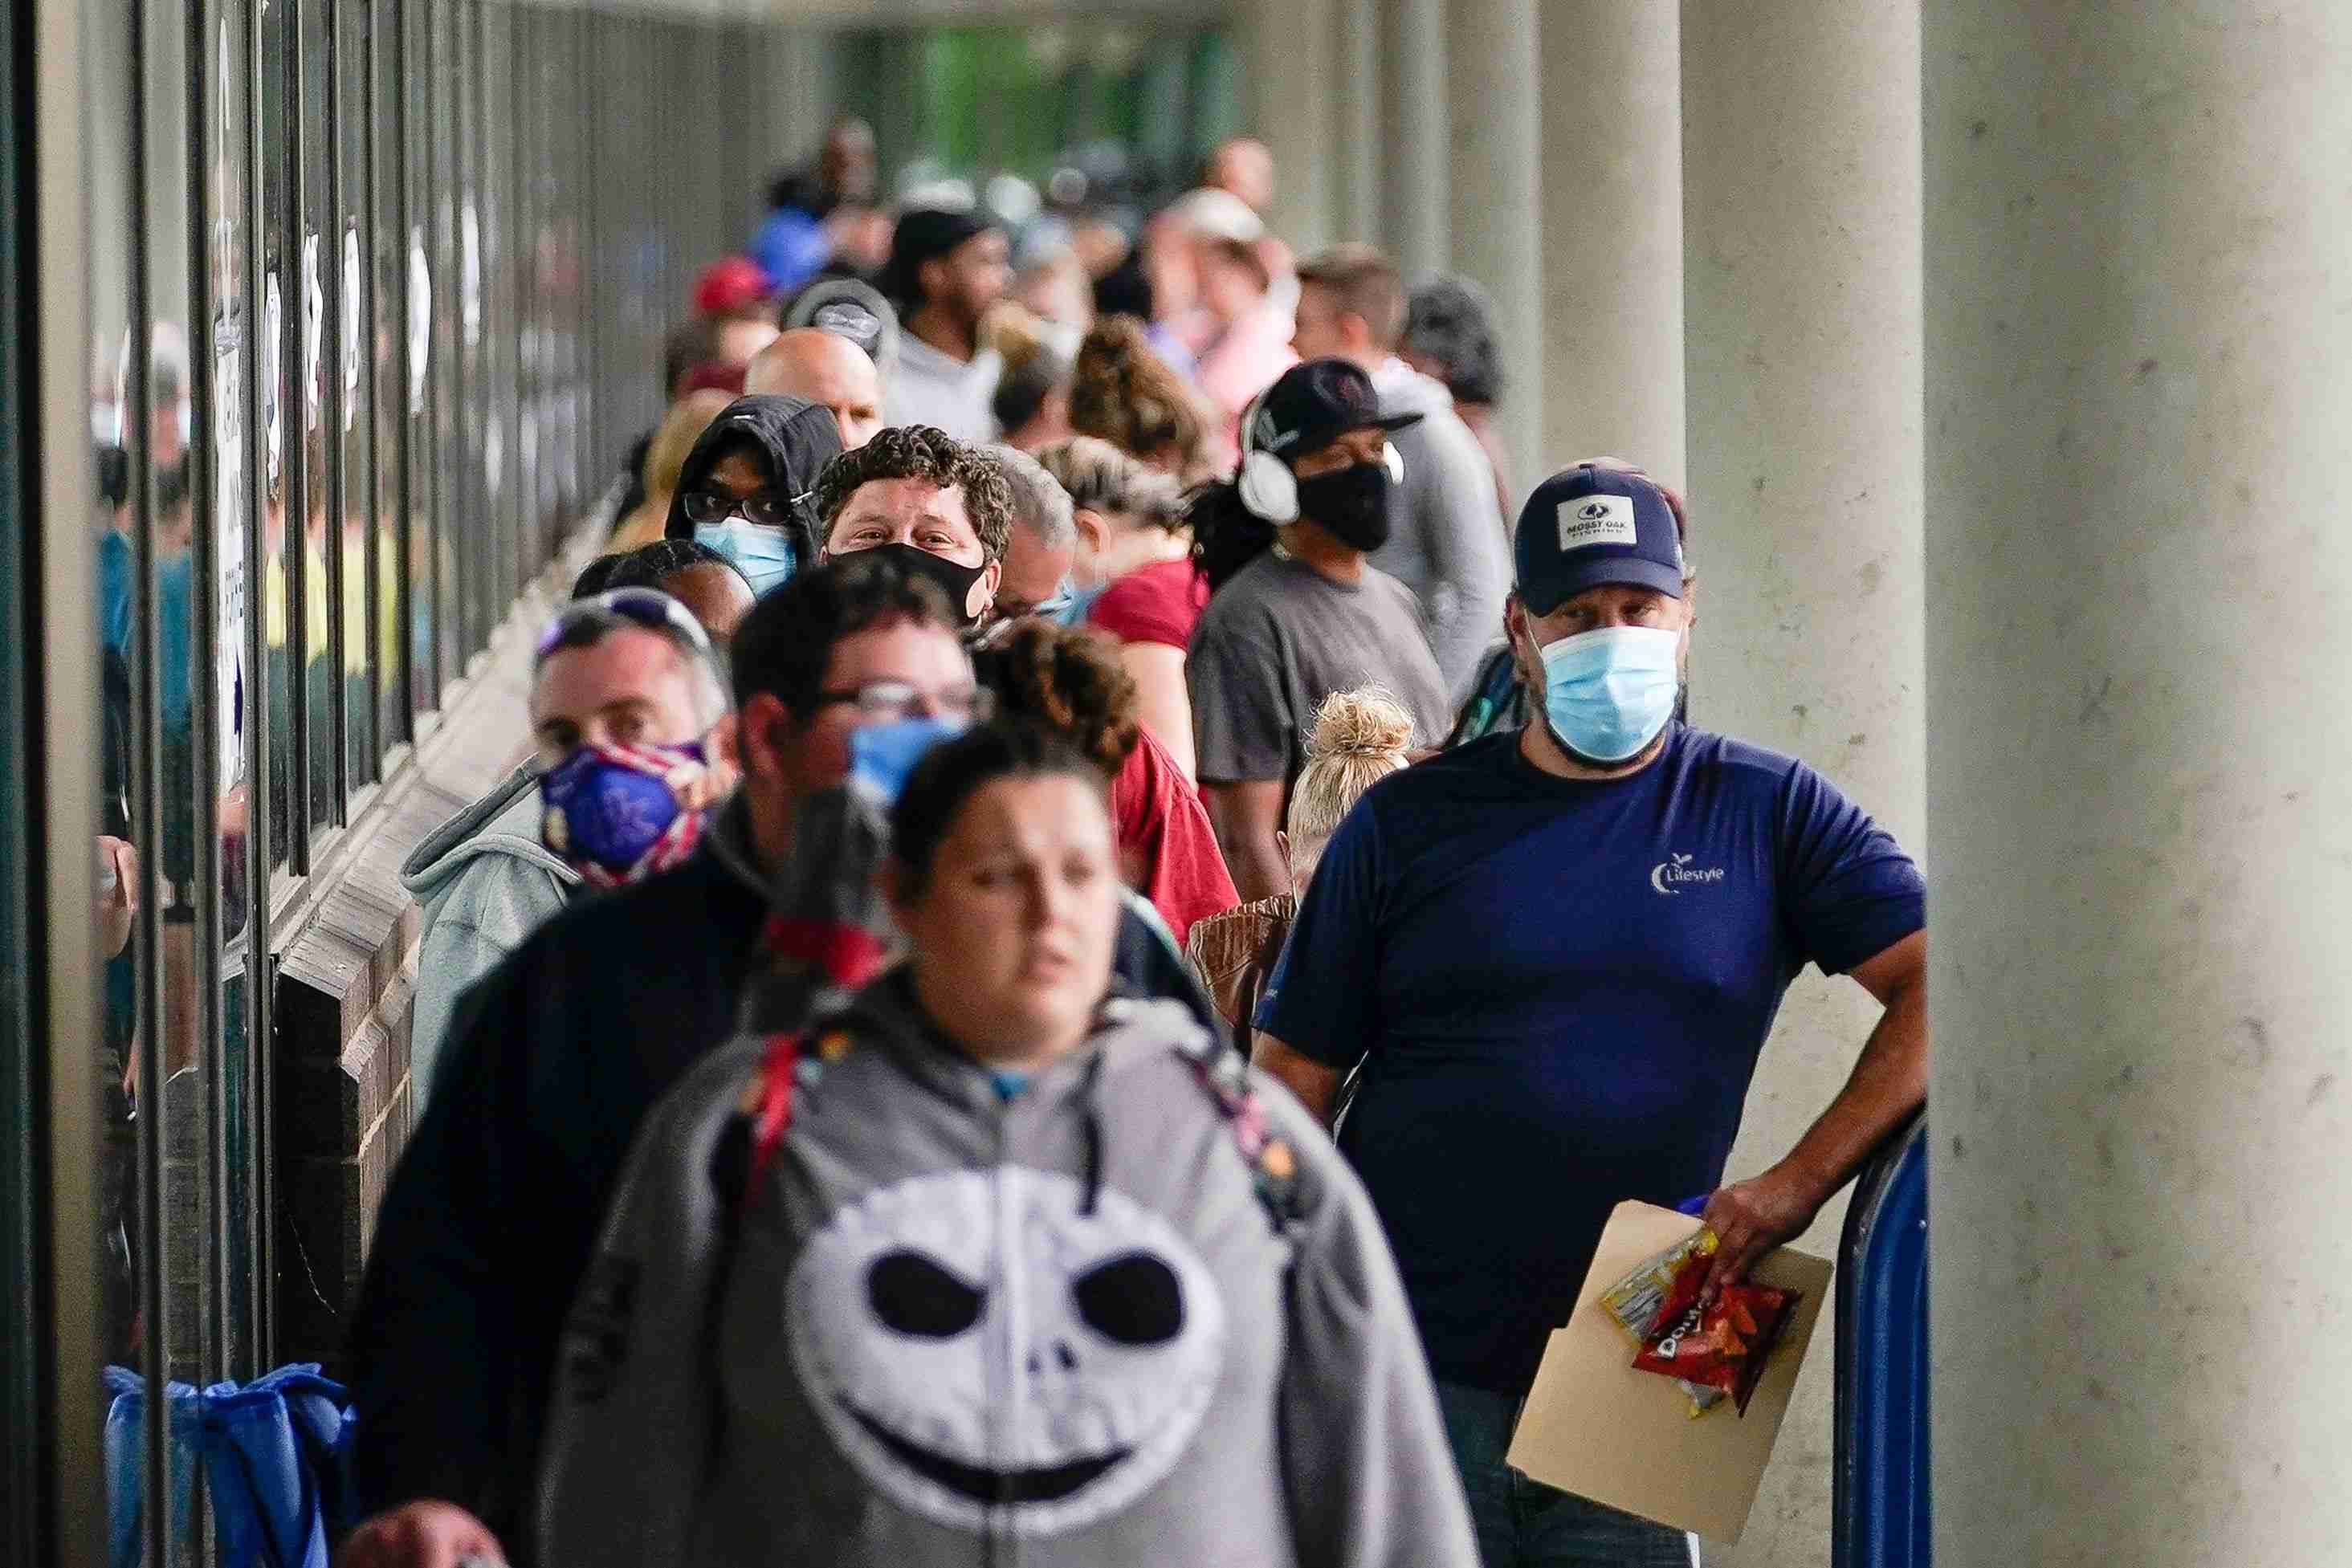 Hundreds of people line up outside a Kentucky Career Center hoping to find assistance with their unemployment claim in Frankfort, Kentucky, U.S. June 18, 2020. REUTERS/Bryan Woolston - RC2TBH9T4NMH